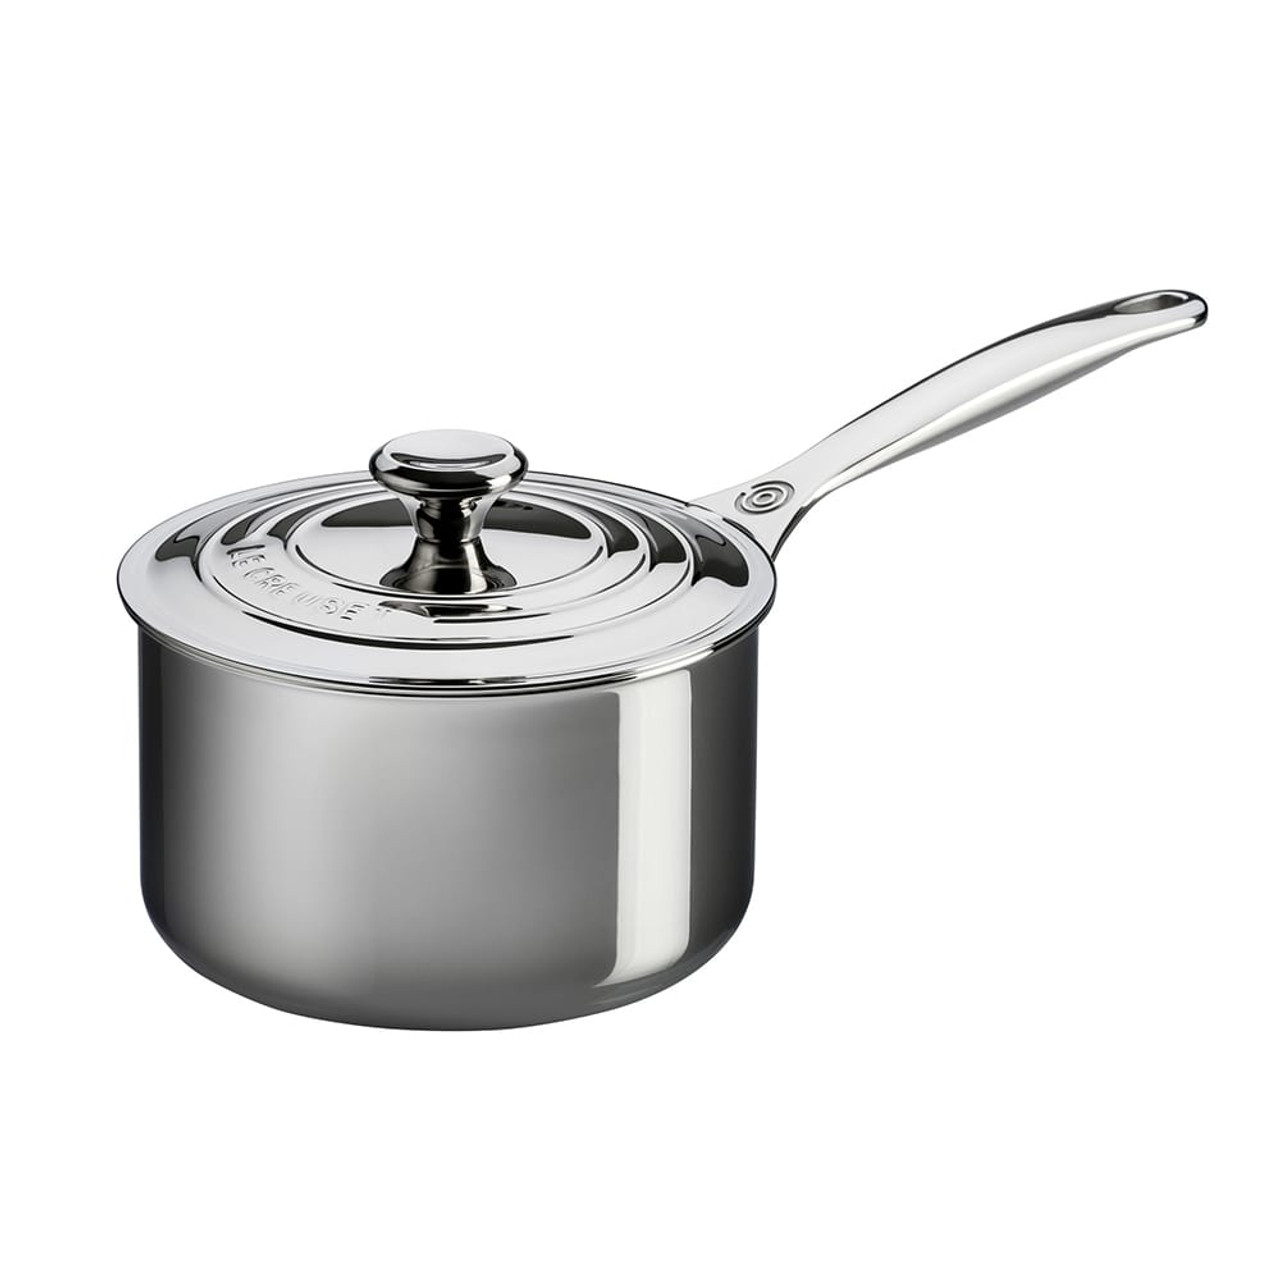 Le Creuset Stainless Steel Fry Pan 12-Inch - Fante's Kitchen Shop - Since  1906